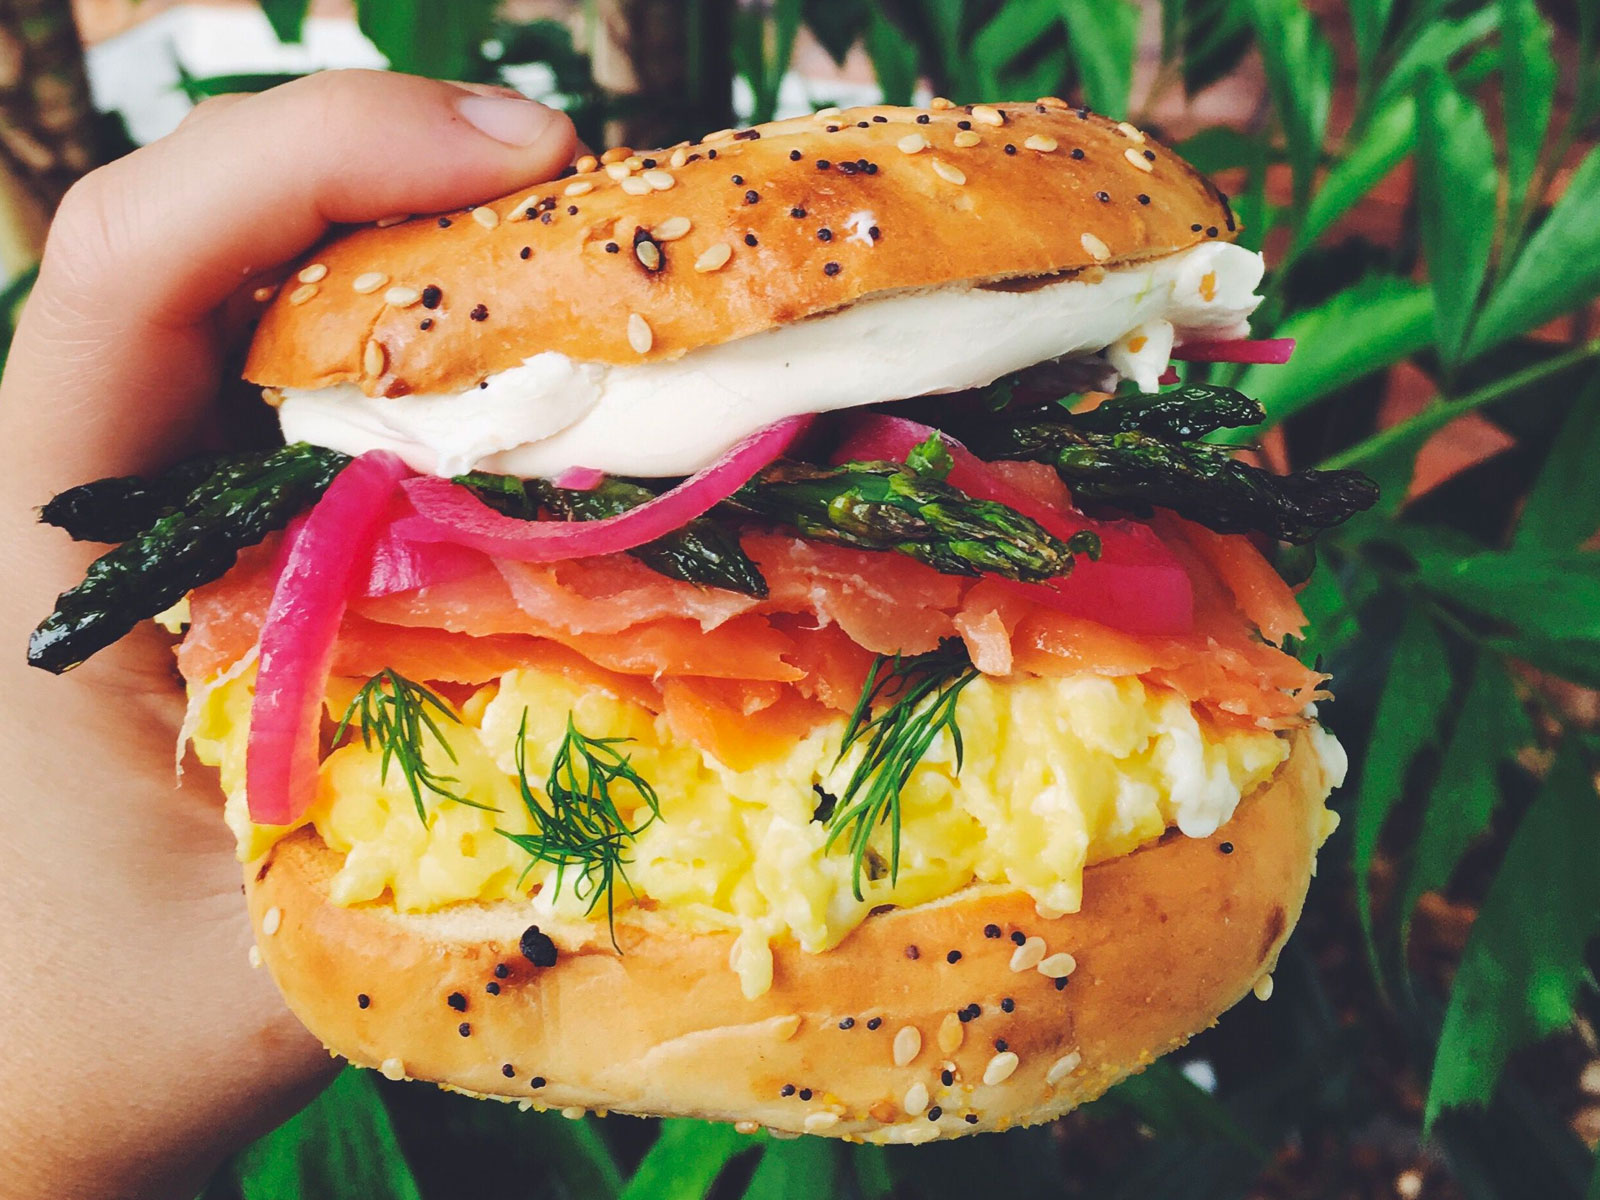 🥯 Order Your Dream Bagel and We’ll Reveal What Age You Will Live to 528